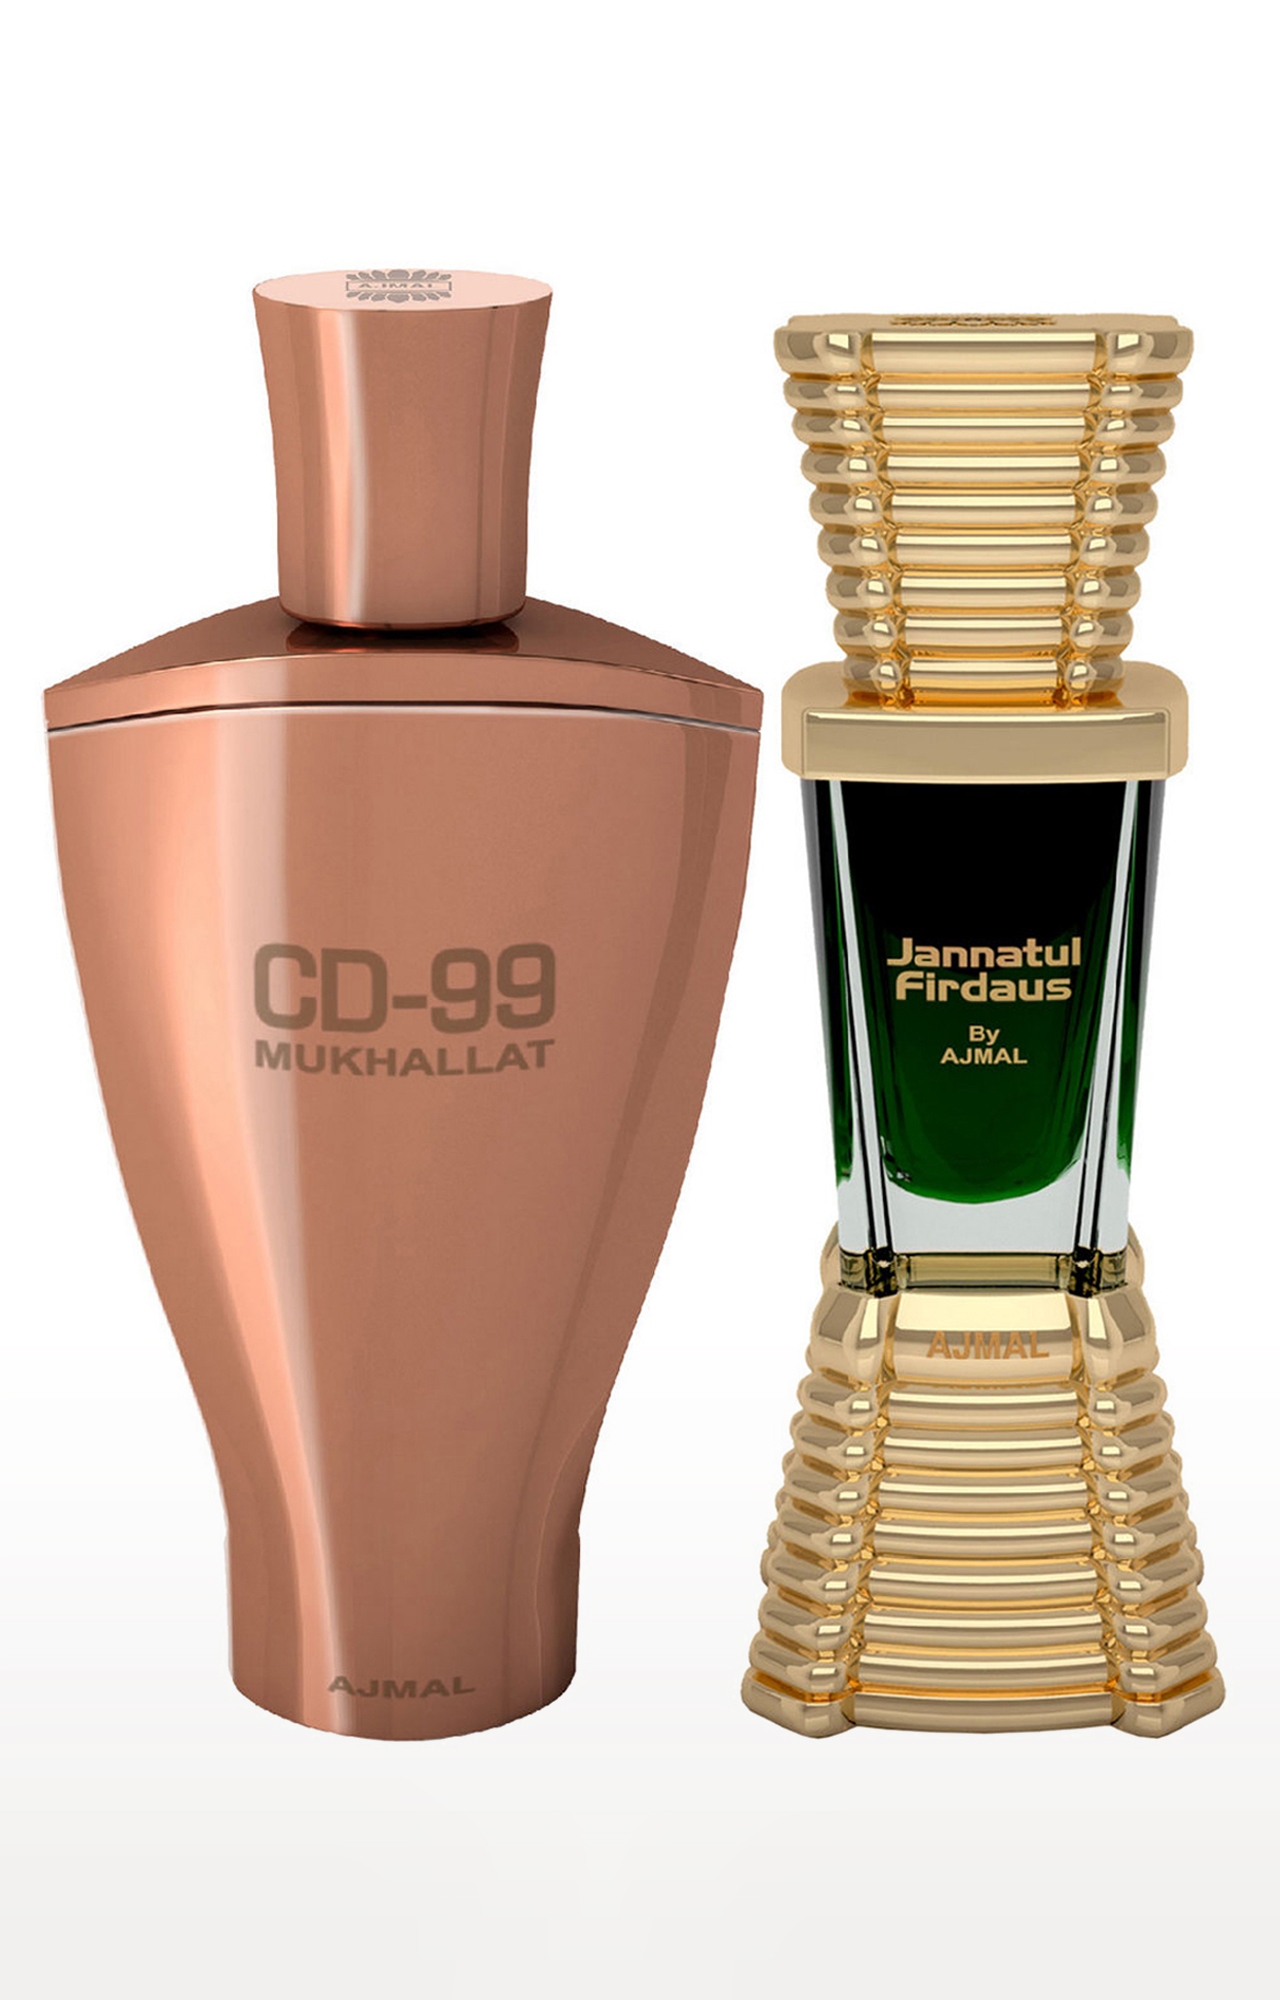 Ajmal CD 99 Mukhallat Concentrated Perfume Oil Oriental Alcohol-free Attar 14ml for Unisex and Jannatul Firdaus Concentrated Perfume Oil Oriental Alcohol-free Attar 10ml for Unisex